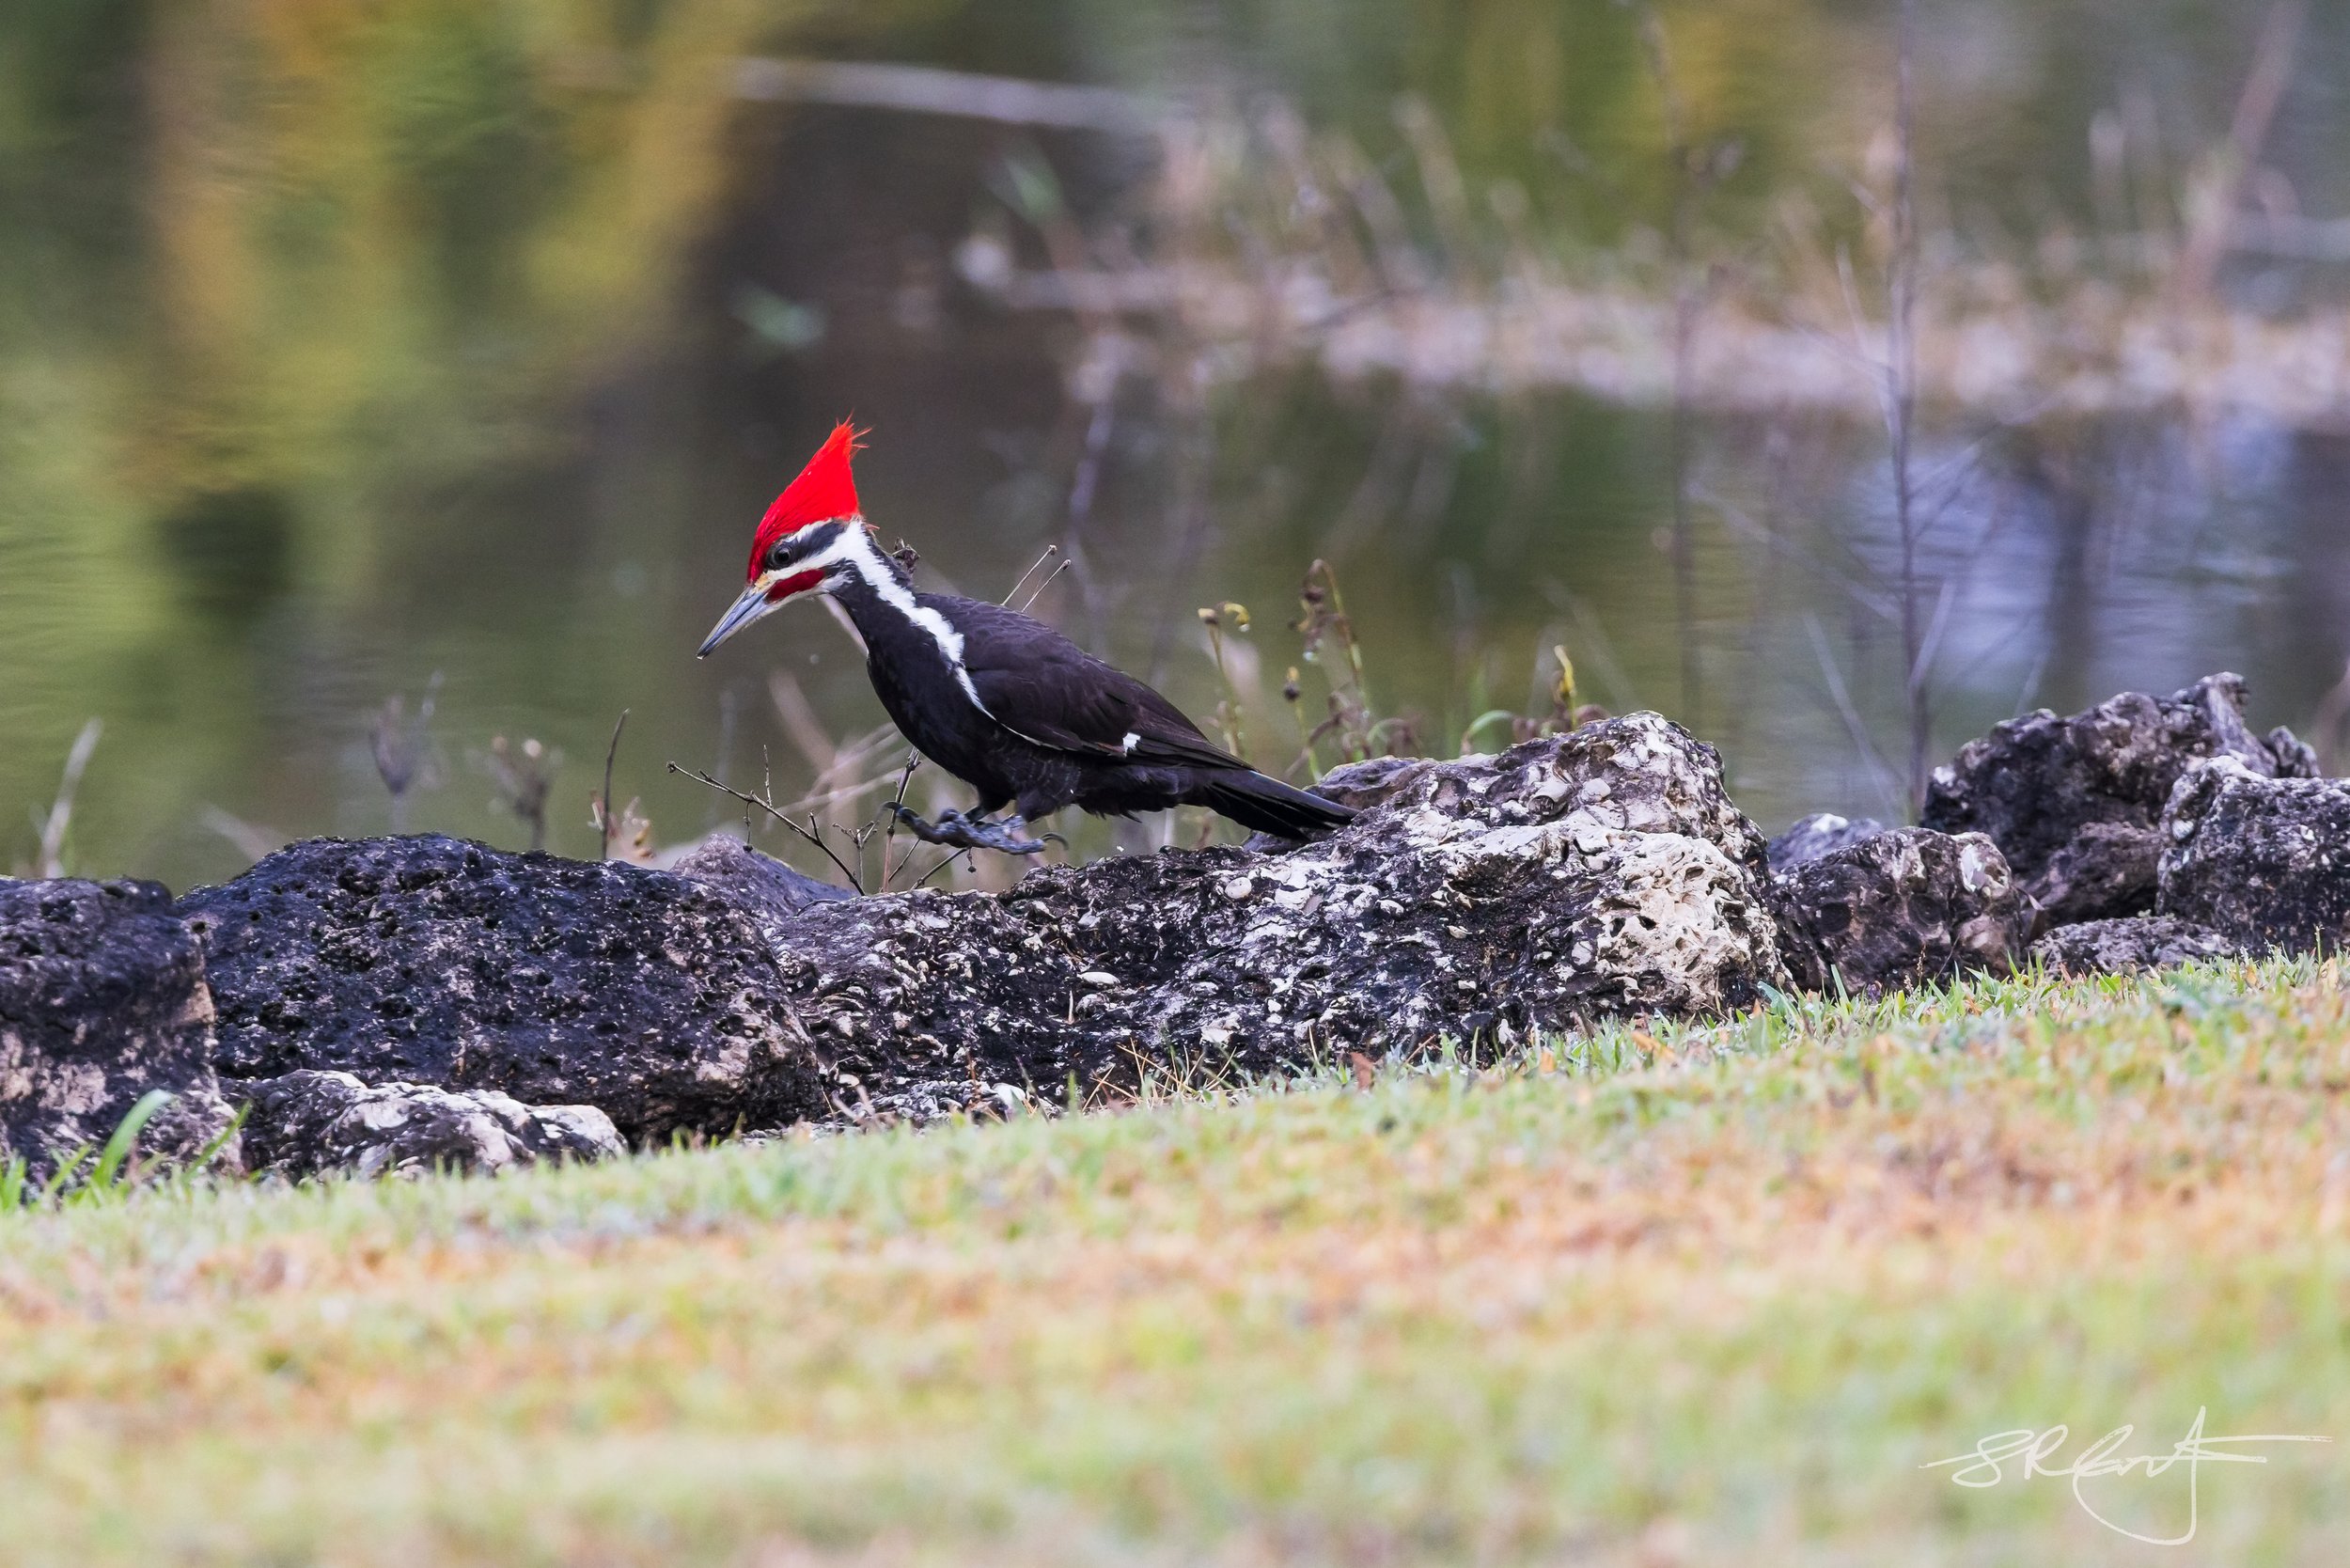 World Record Standing Broad Jump, Pileated Woodpecker Division